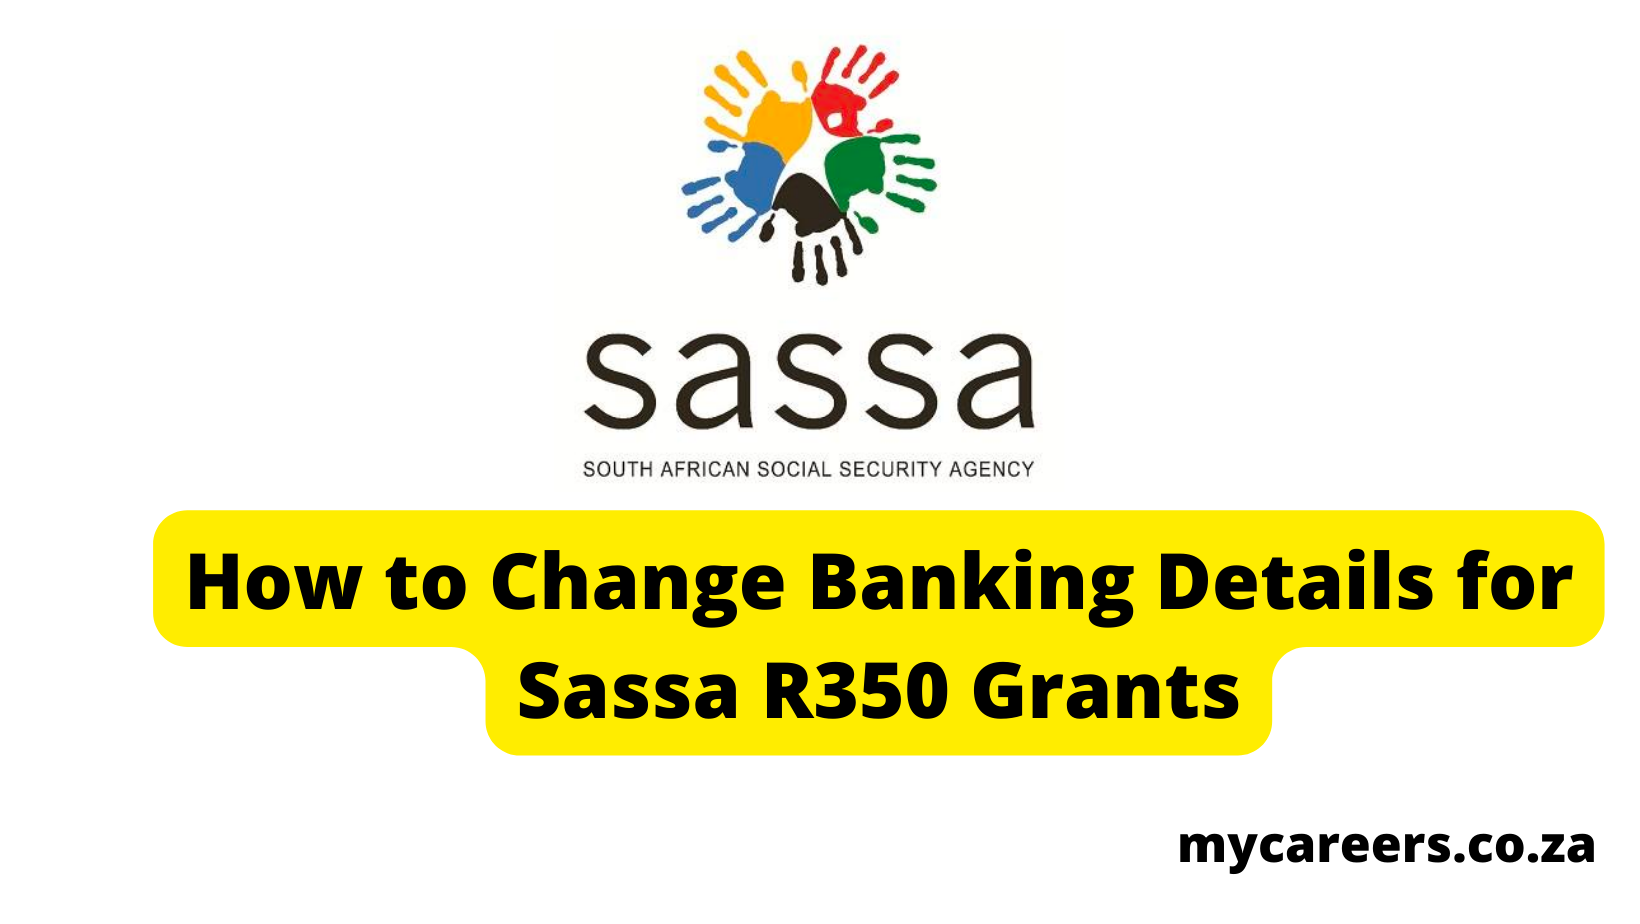 Complete Guide: How to Submit Your Banking Details to Sassa For the R350 Grant